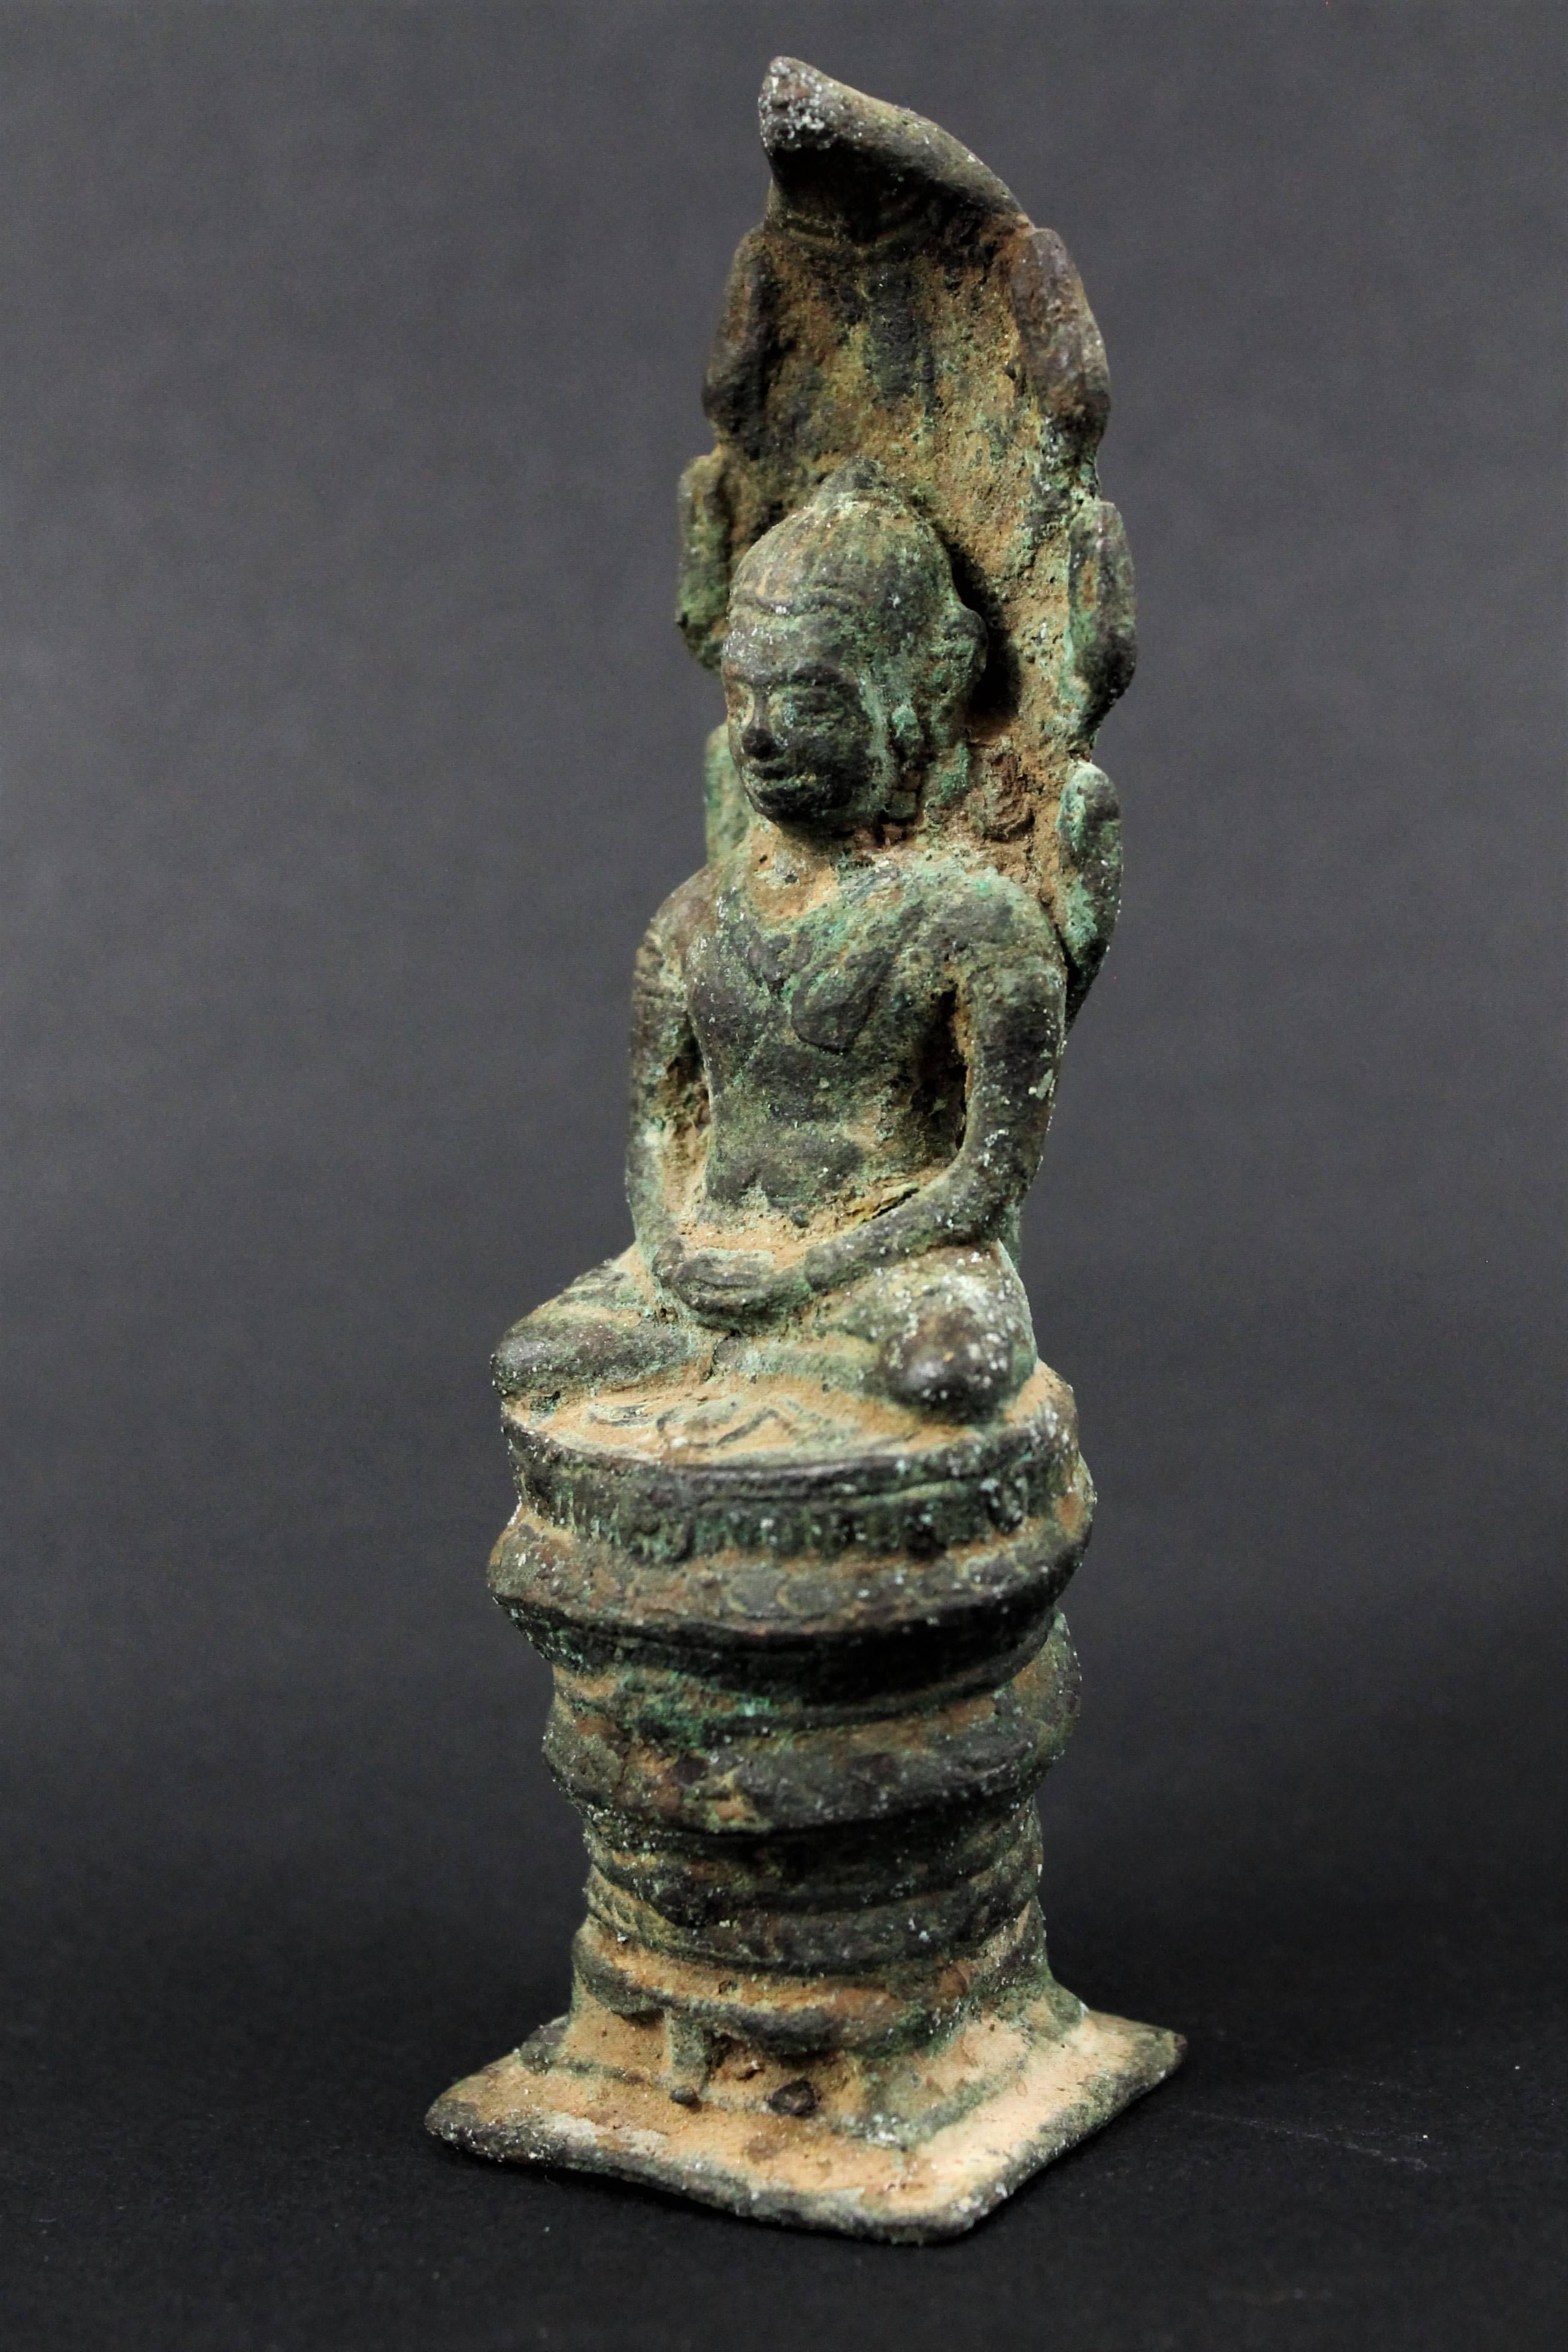 Bronze Buddha wearing the monastic garment. It sits on the coiled naga whose body forms the three spirals. The seven heads of the serpent form a canopy to protect Buddha during meditation, with a representation of the wheel (cakra) on the back of